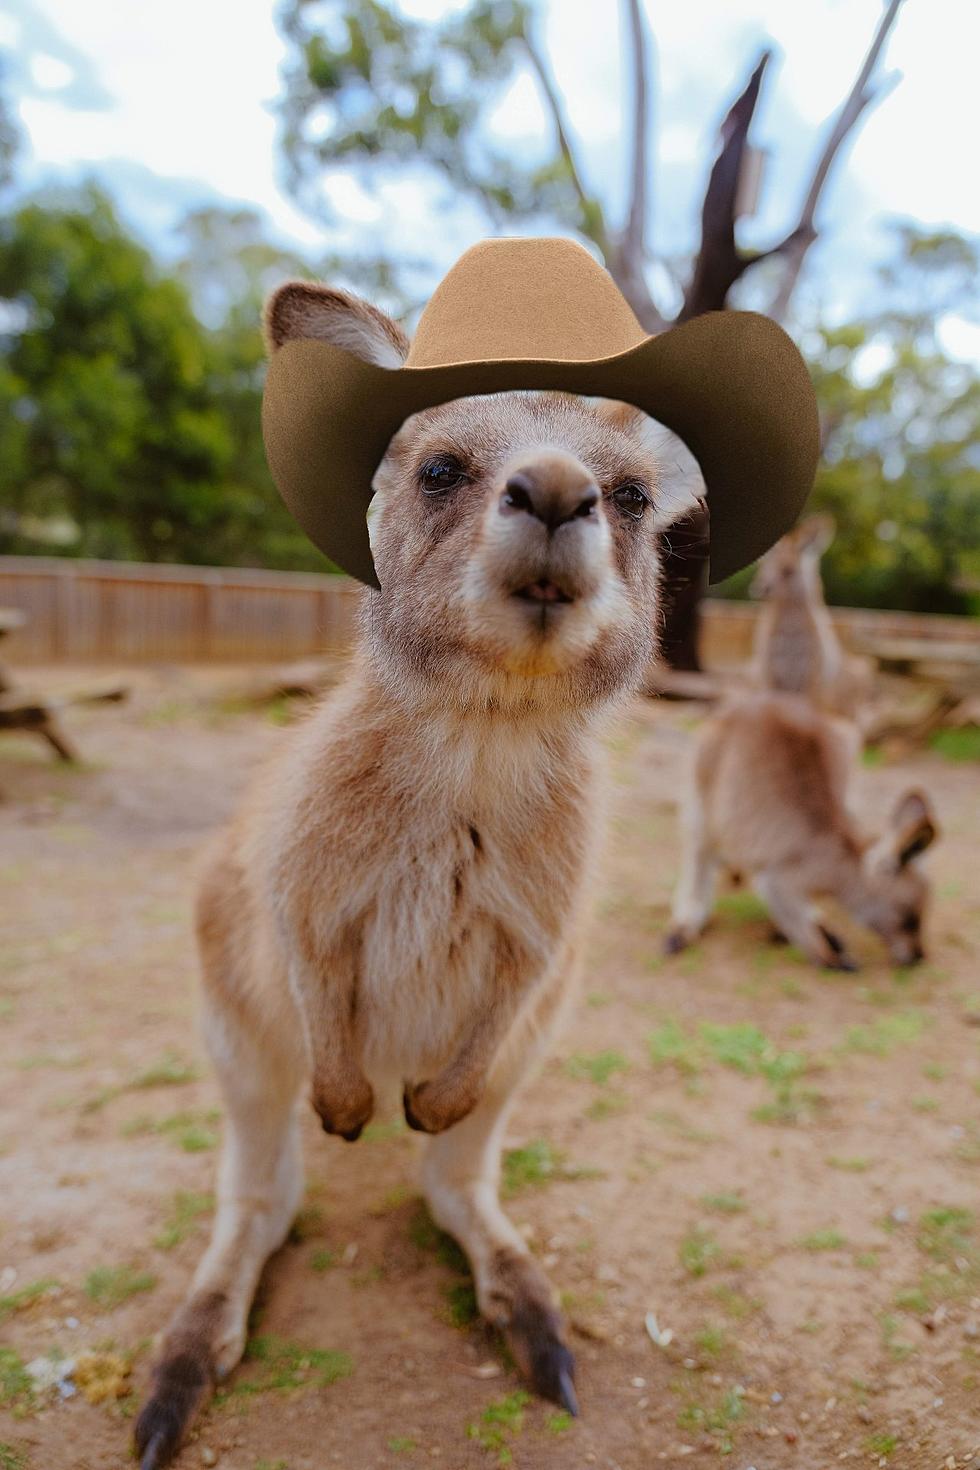 Texans Are Free To Realize Their Dreams Of Owning A Kangaroo